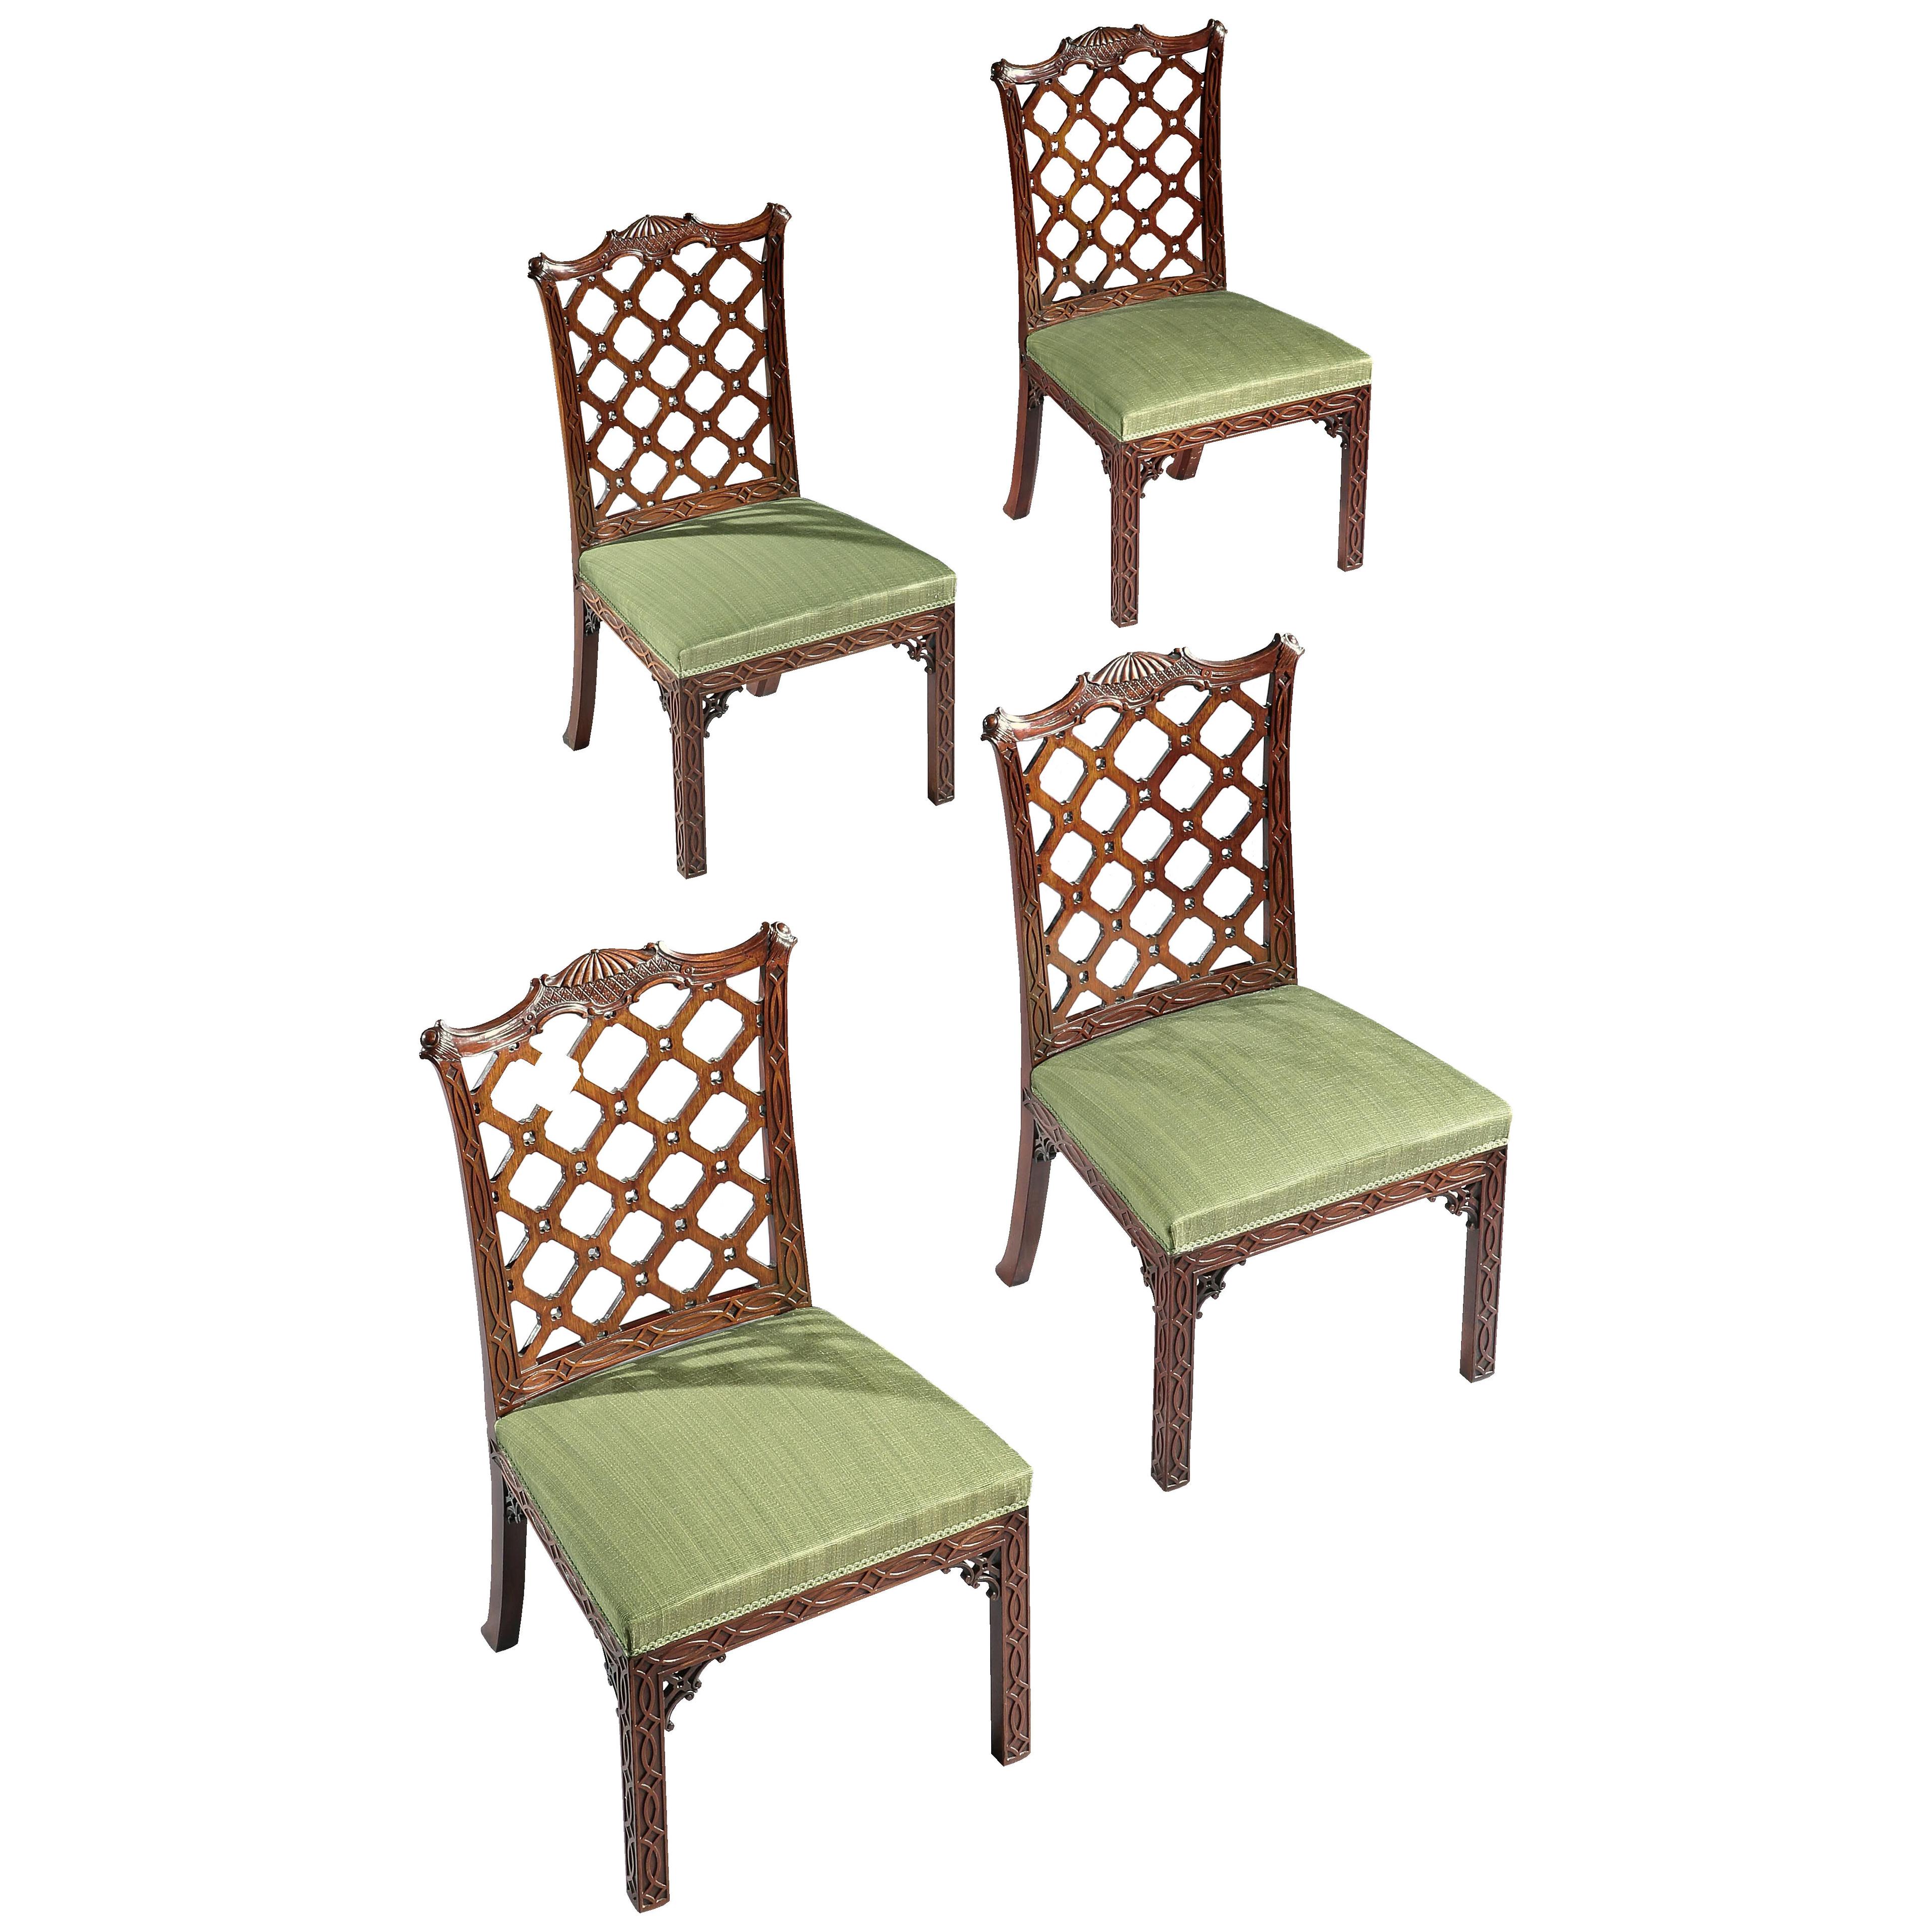 THE KING’S NYMPTON DINING CHAIRS